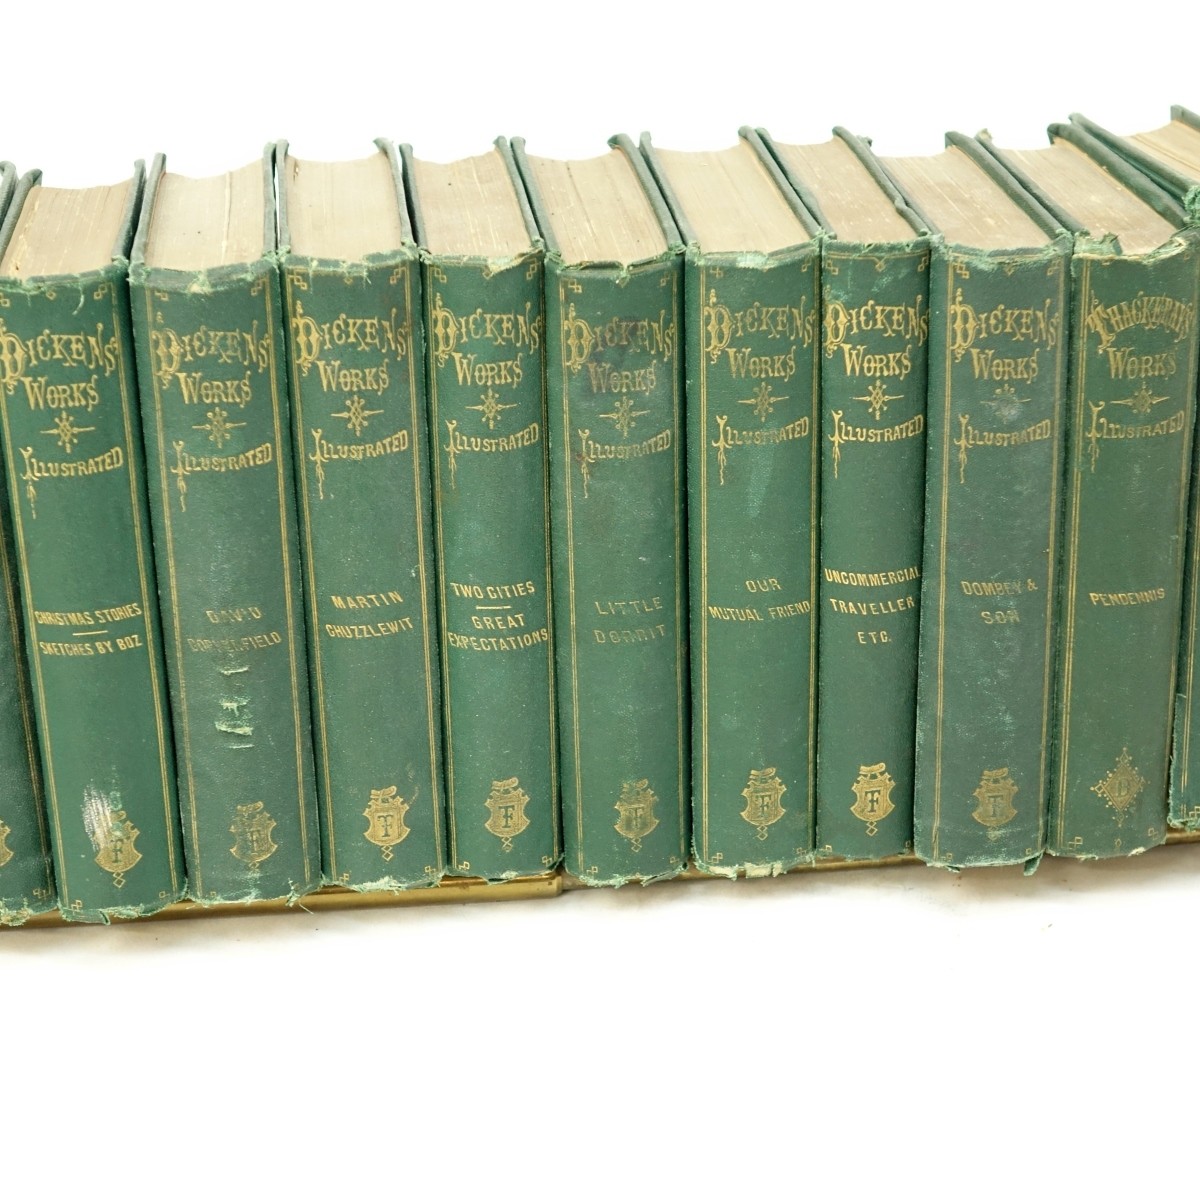 13 Volumes by Charles Dickens